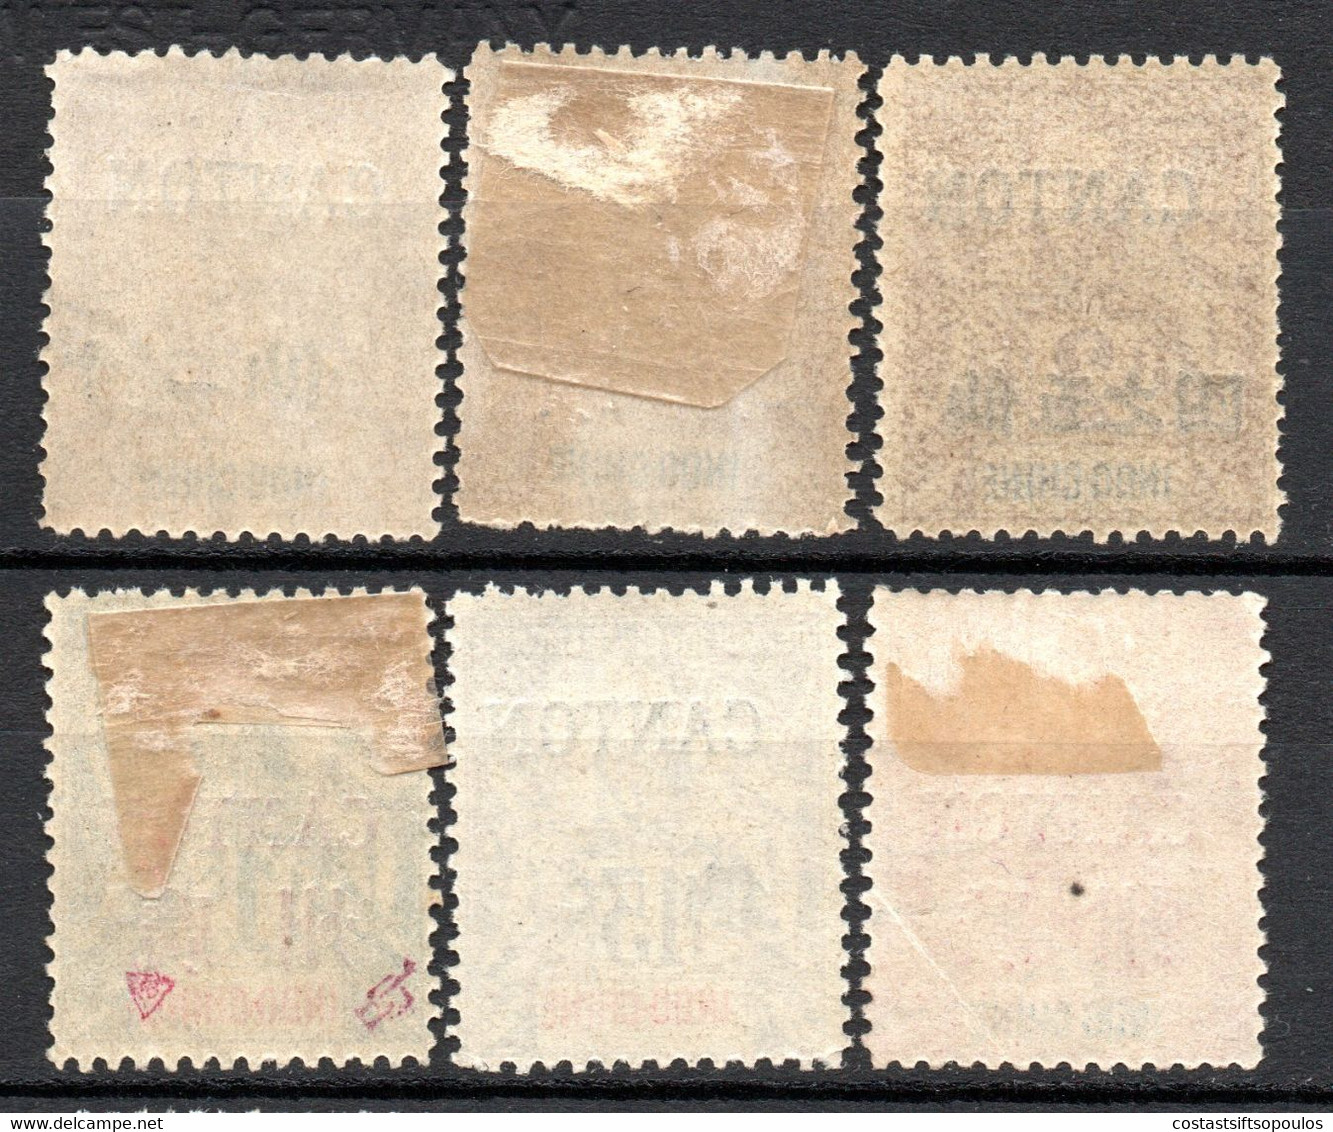 1407. CHINA. FRENCH INDO-CHINA  CANTON. TCHONGKING, 28 ST. LOT, NOT ALL GENUINE. 9 SCANS